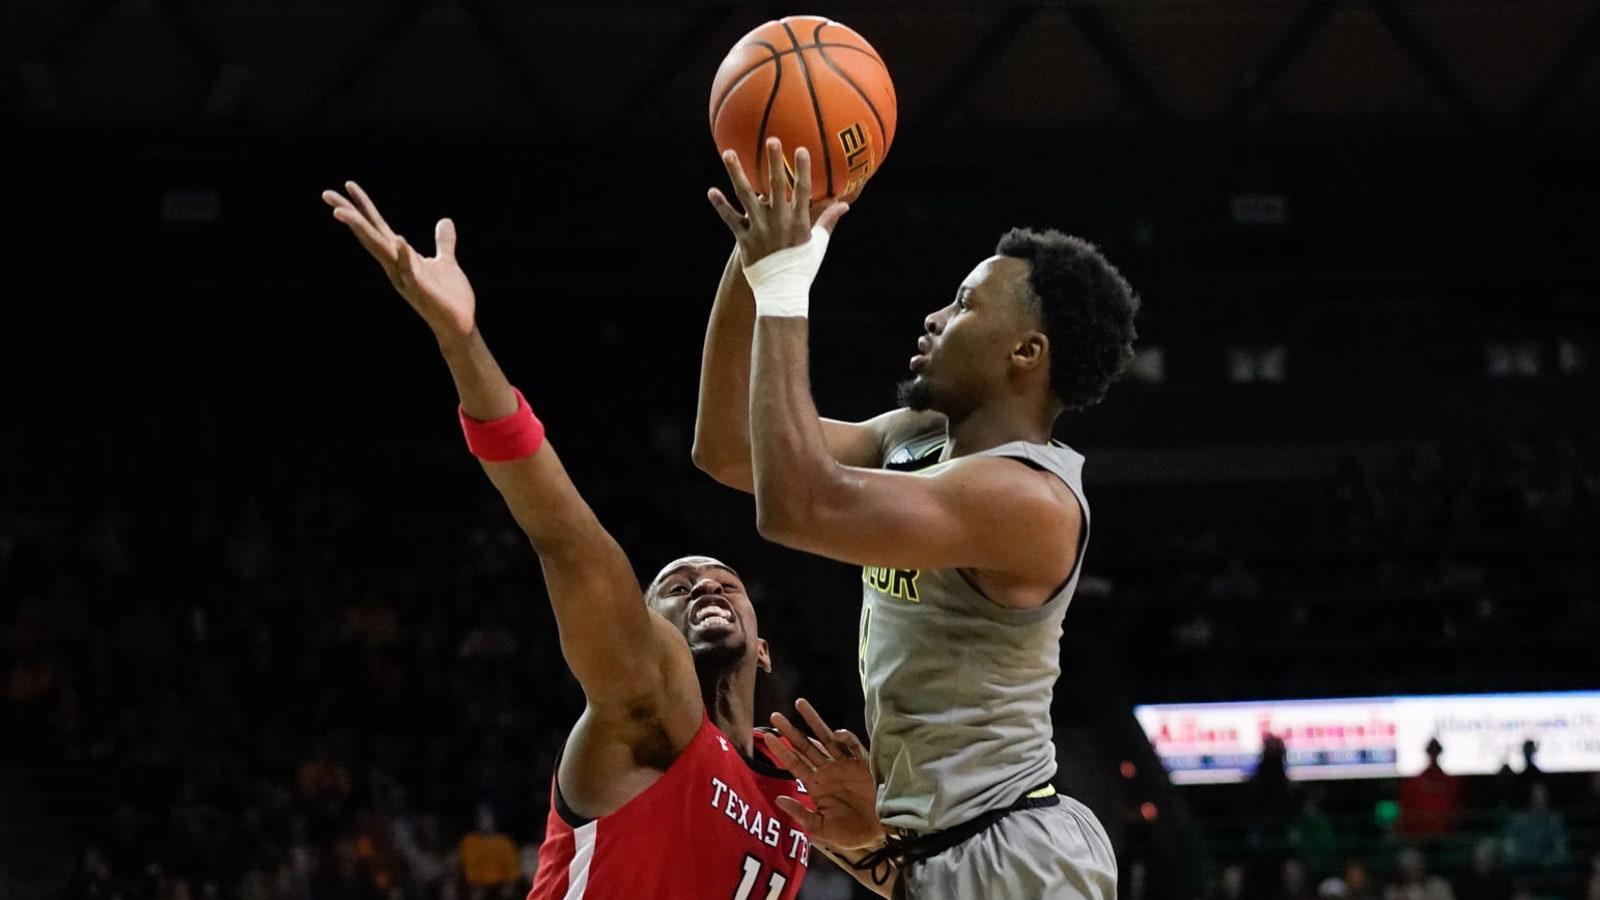 No. 1 Baylor's 21-game win streak snapped by No. 19 Texas Tech